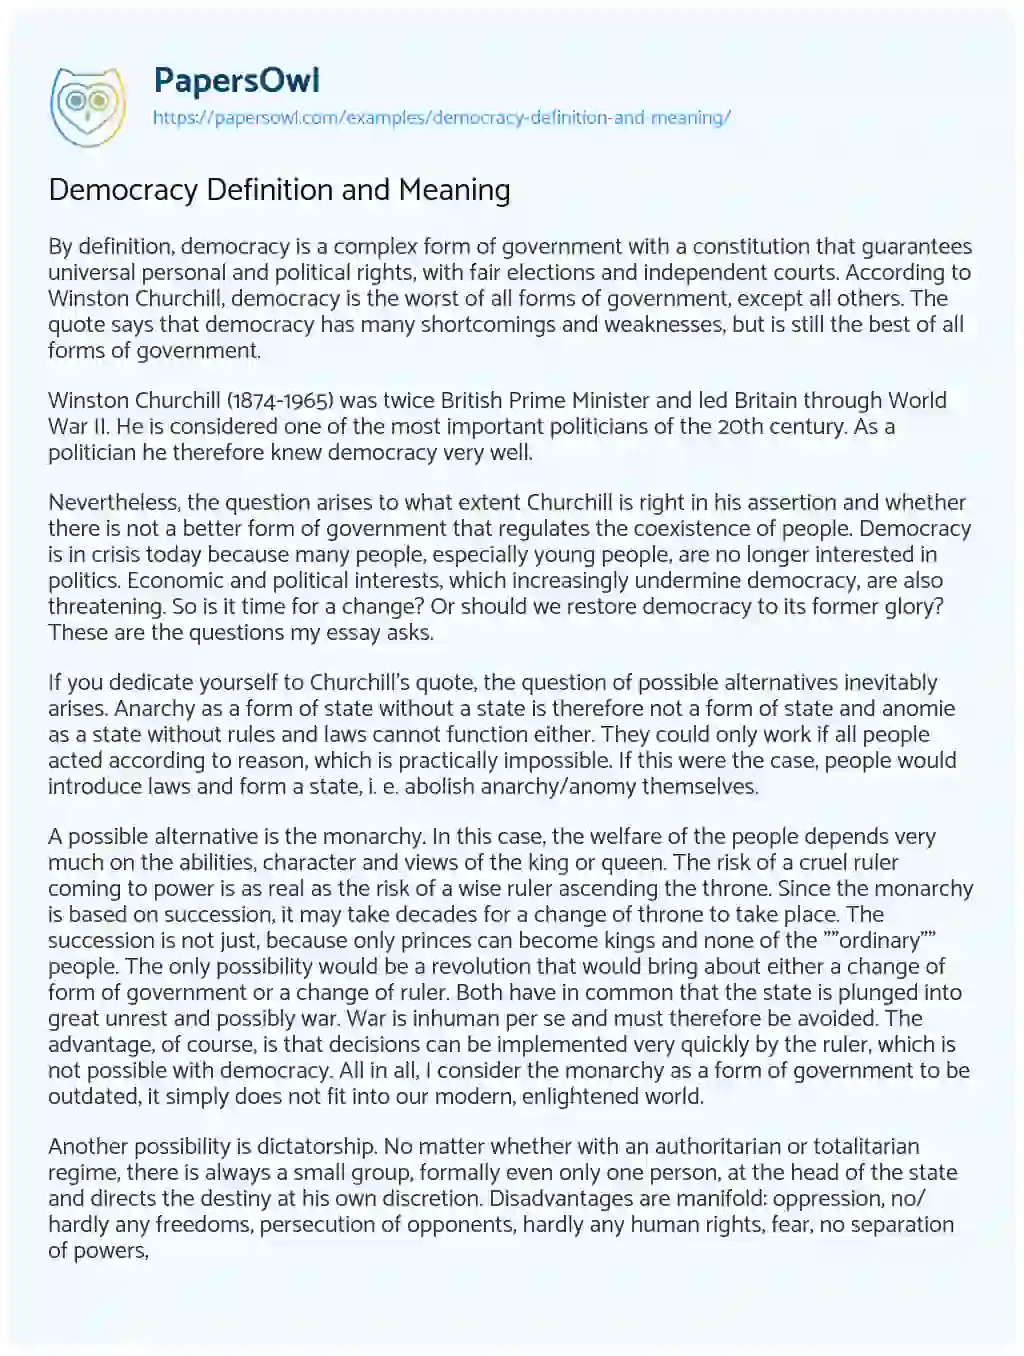 Democracy Definition and Meaning essay